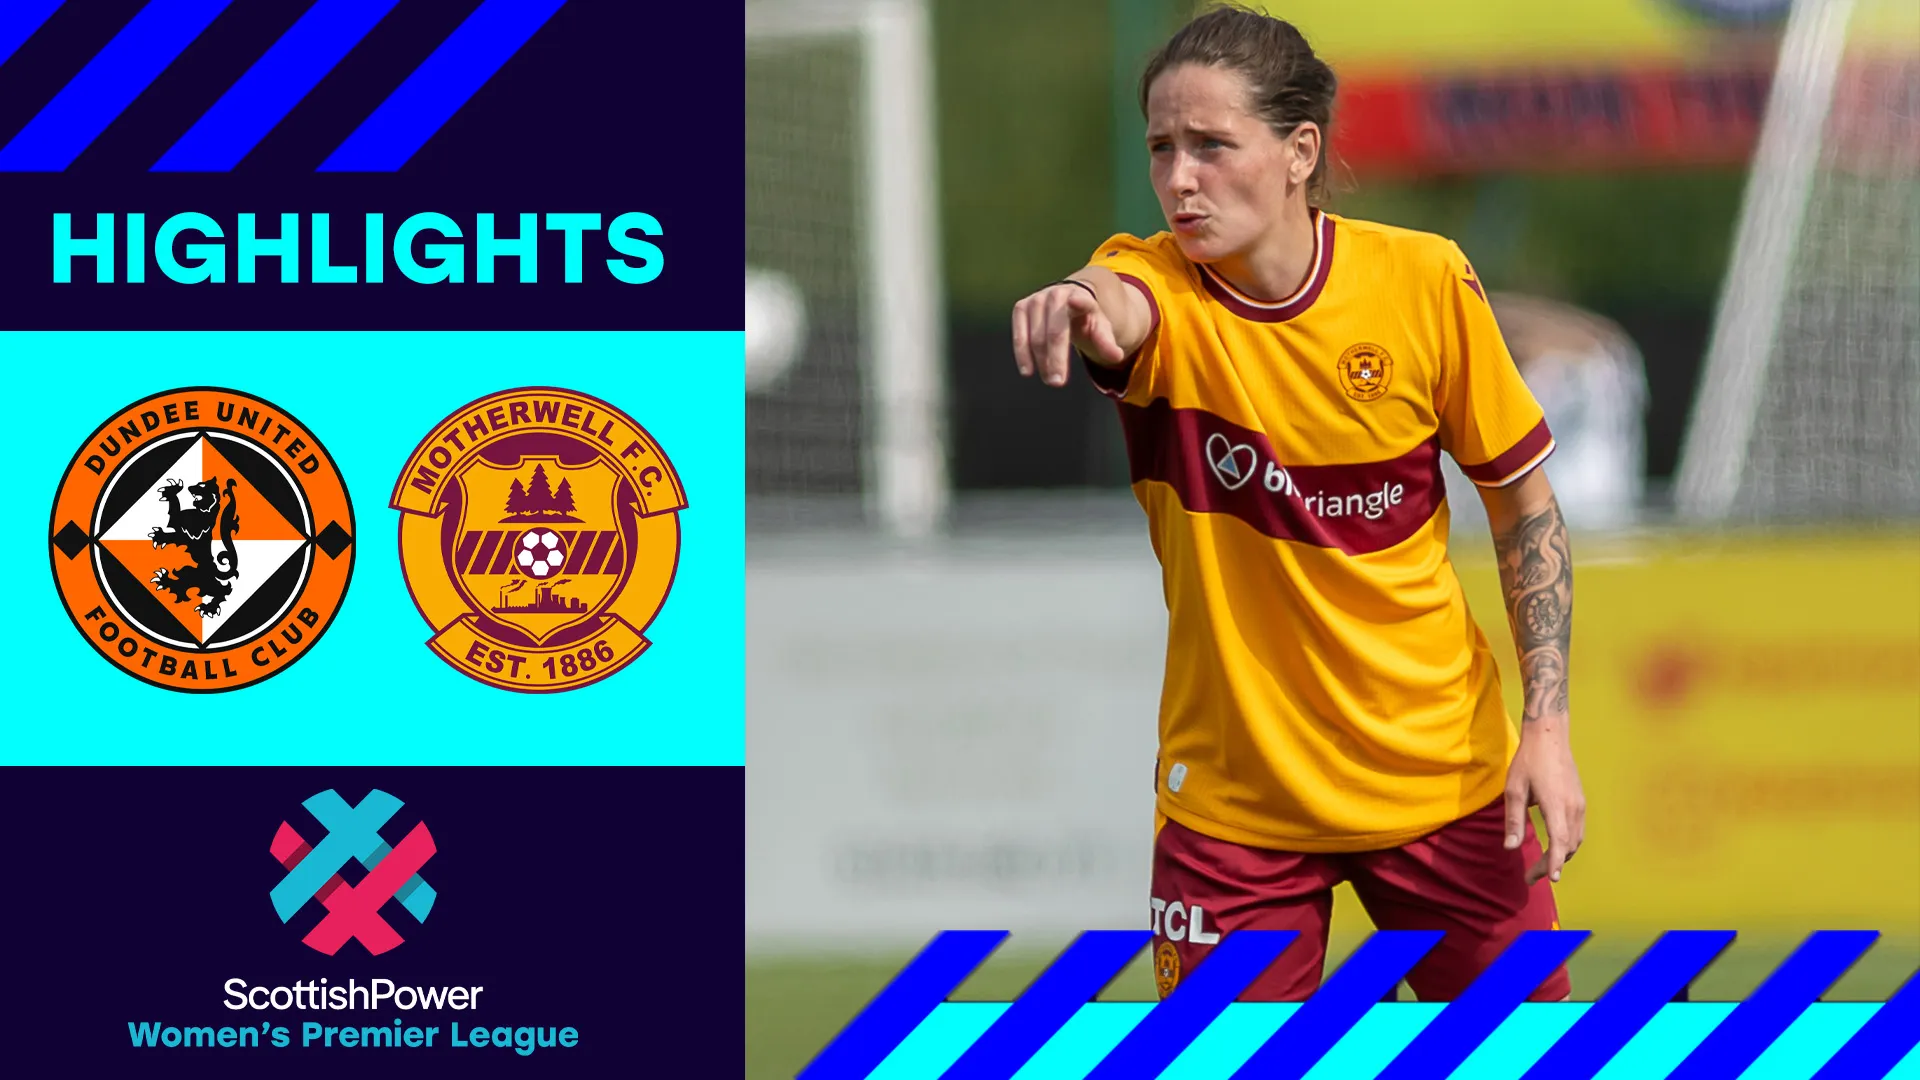 Image for Dundee United 0-1 Motherwell | Women of Steel close gap on 7th win at Foundation Park | SWPL